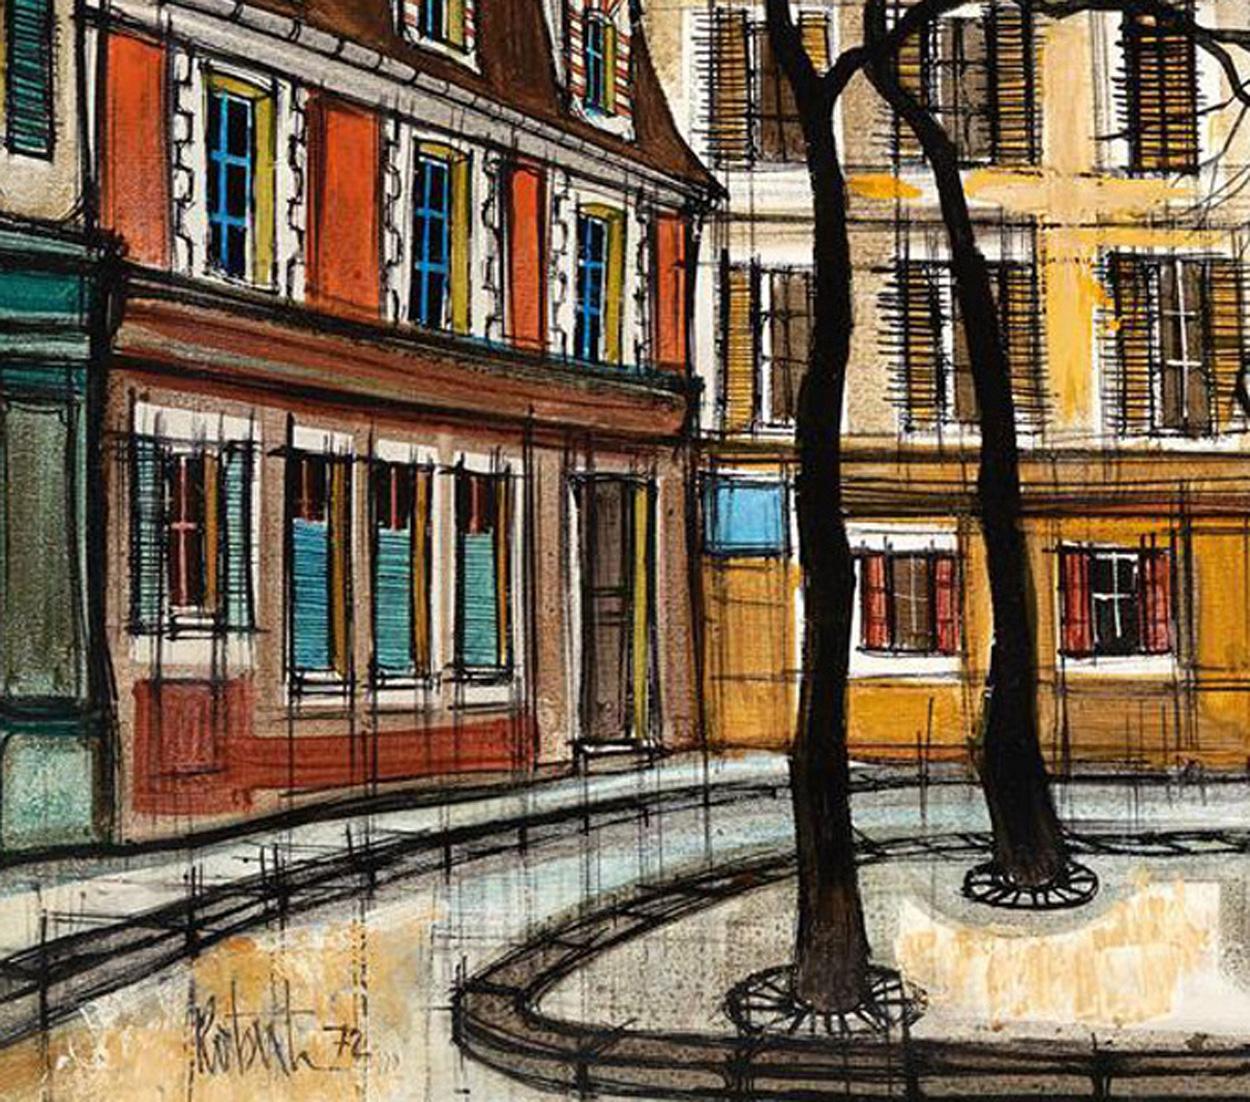 Bernard Buffet (Follower Of), 20th century French School, Place Furstenberg, St Germaine, 1972, oil on canvas laid on board, signed and dated 1972 lower left. In contemporary frame with minor wear.

Measures: 19 inches x 25 inches (48.5 x 63.5